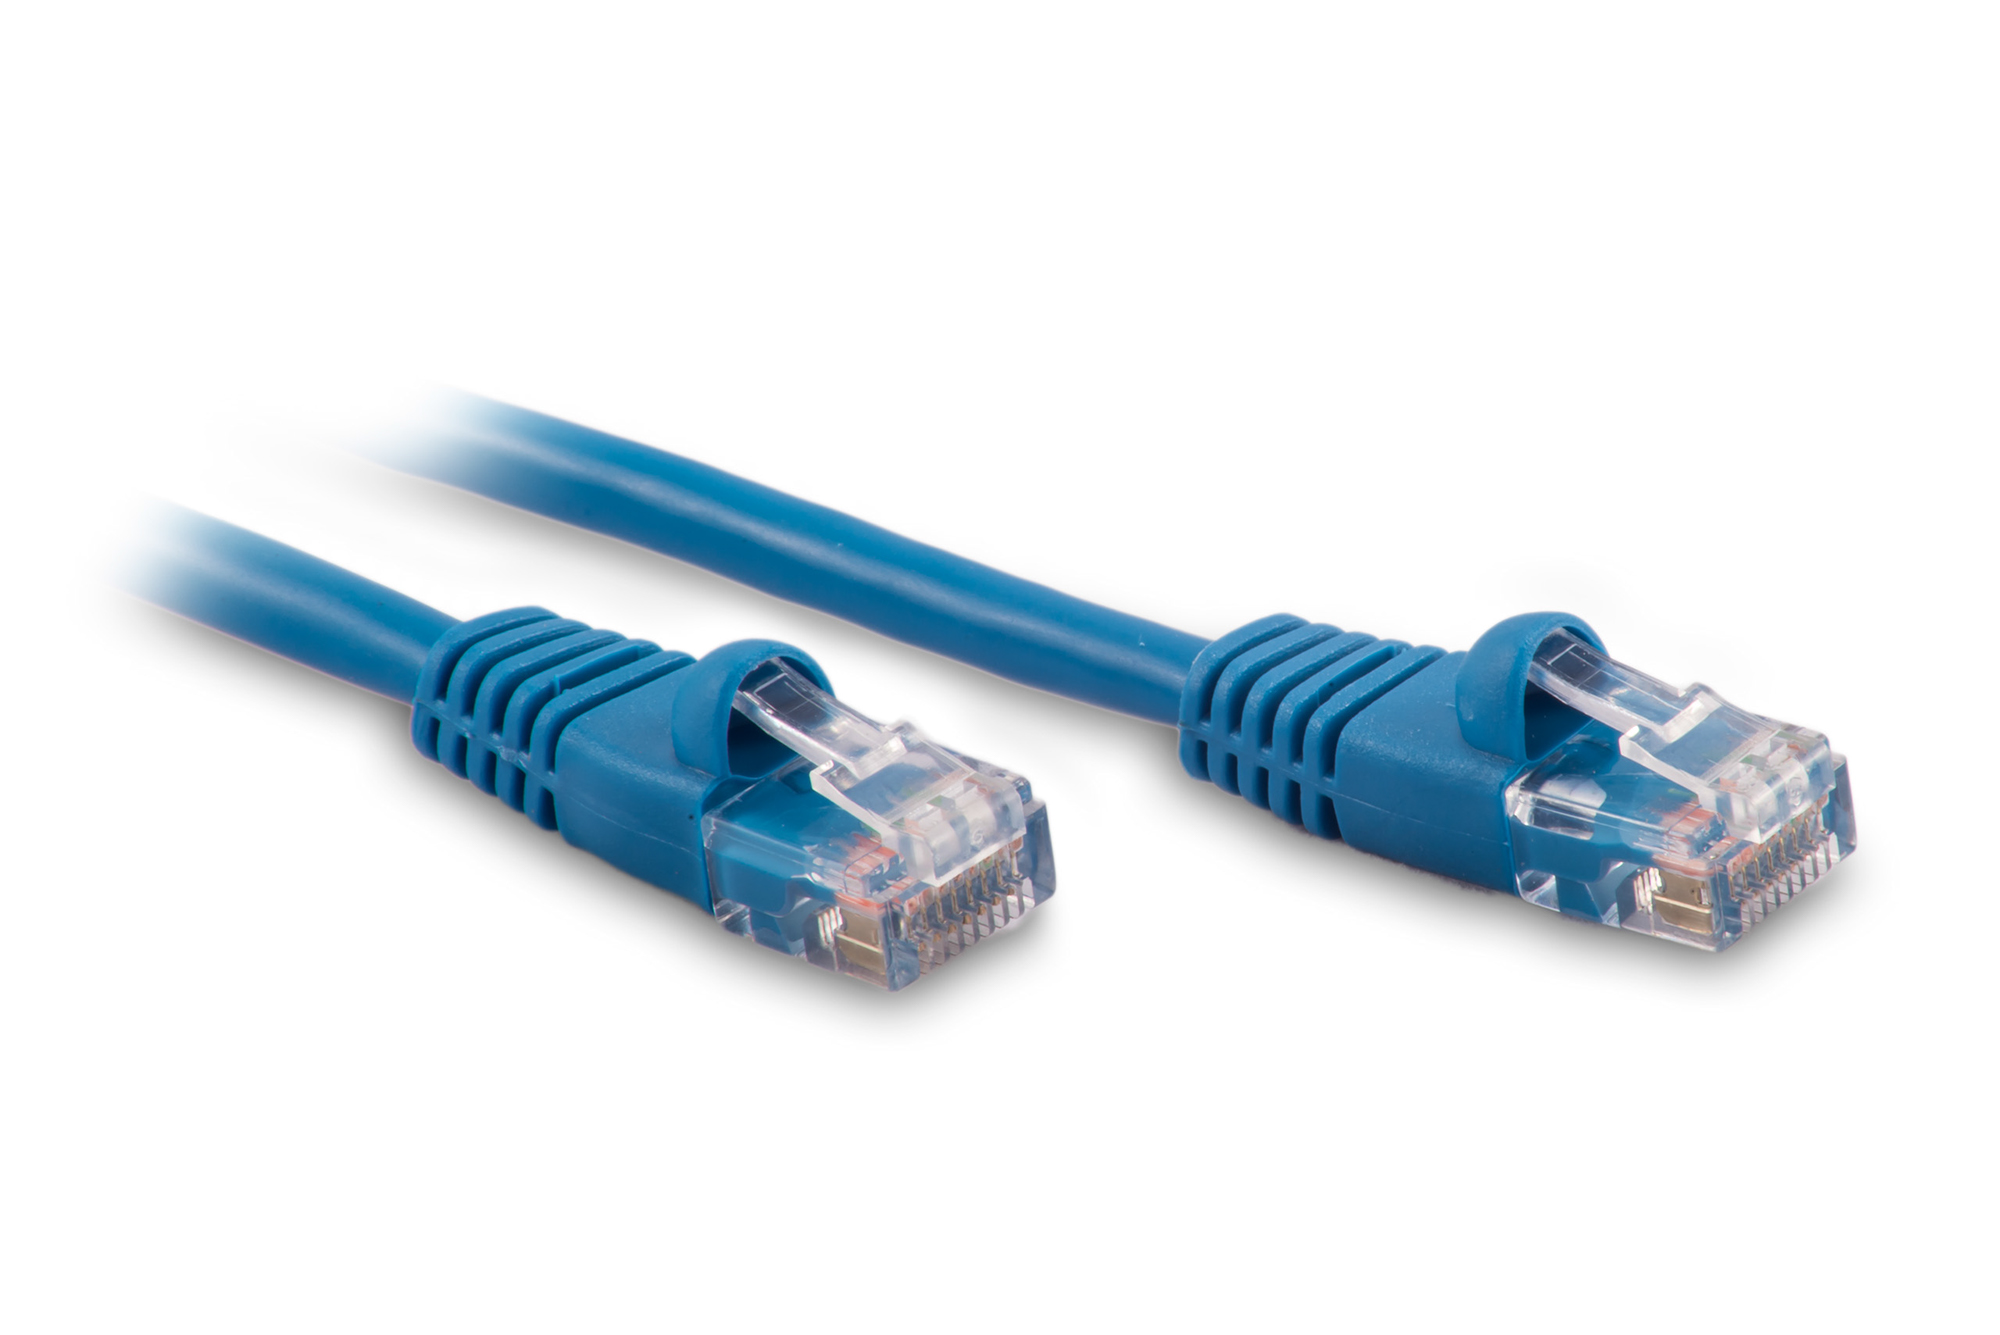 7ft Cat5e Ethernet Patch Cable - Blue Color - Snagless Boot, Stranded, RJ45, 350Mhz, 24AWG